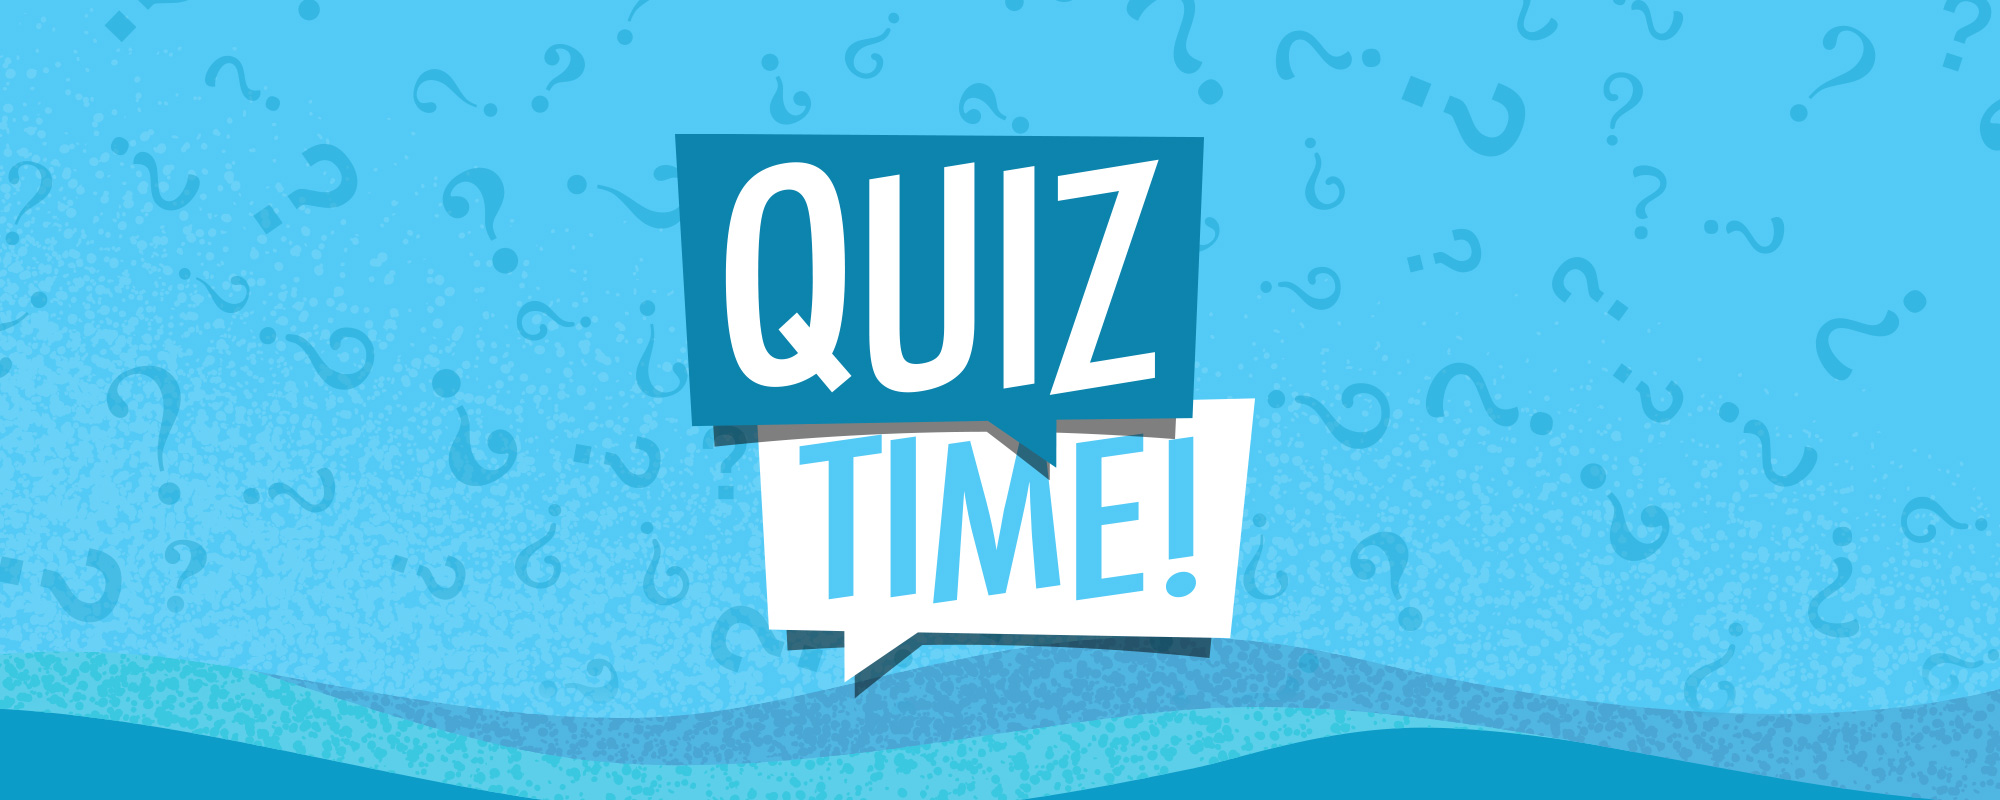 a water graphic showing the words Quiz Time!